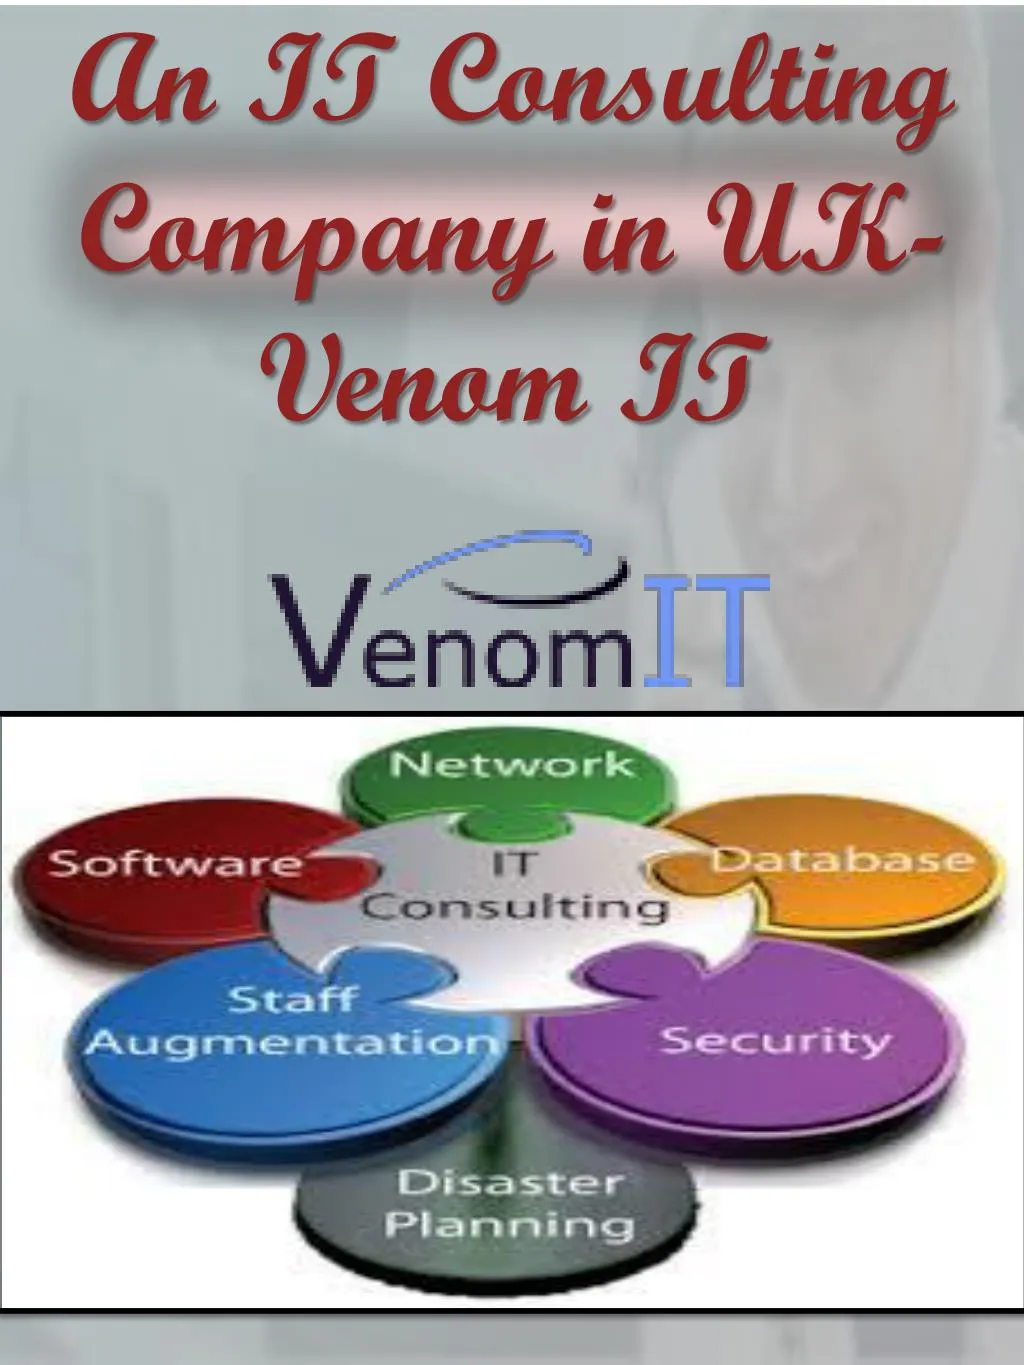 an it consulting company in uk venom it